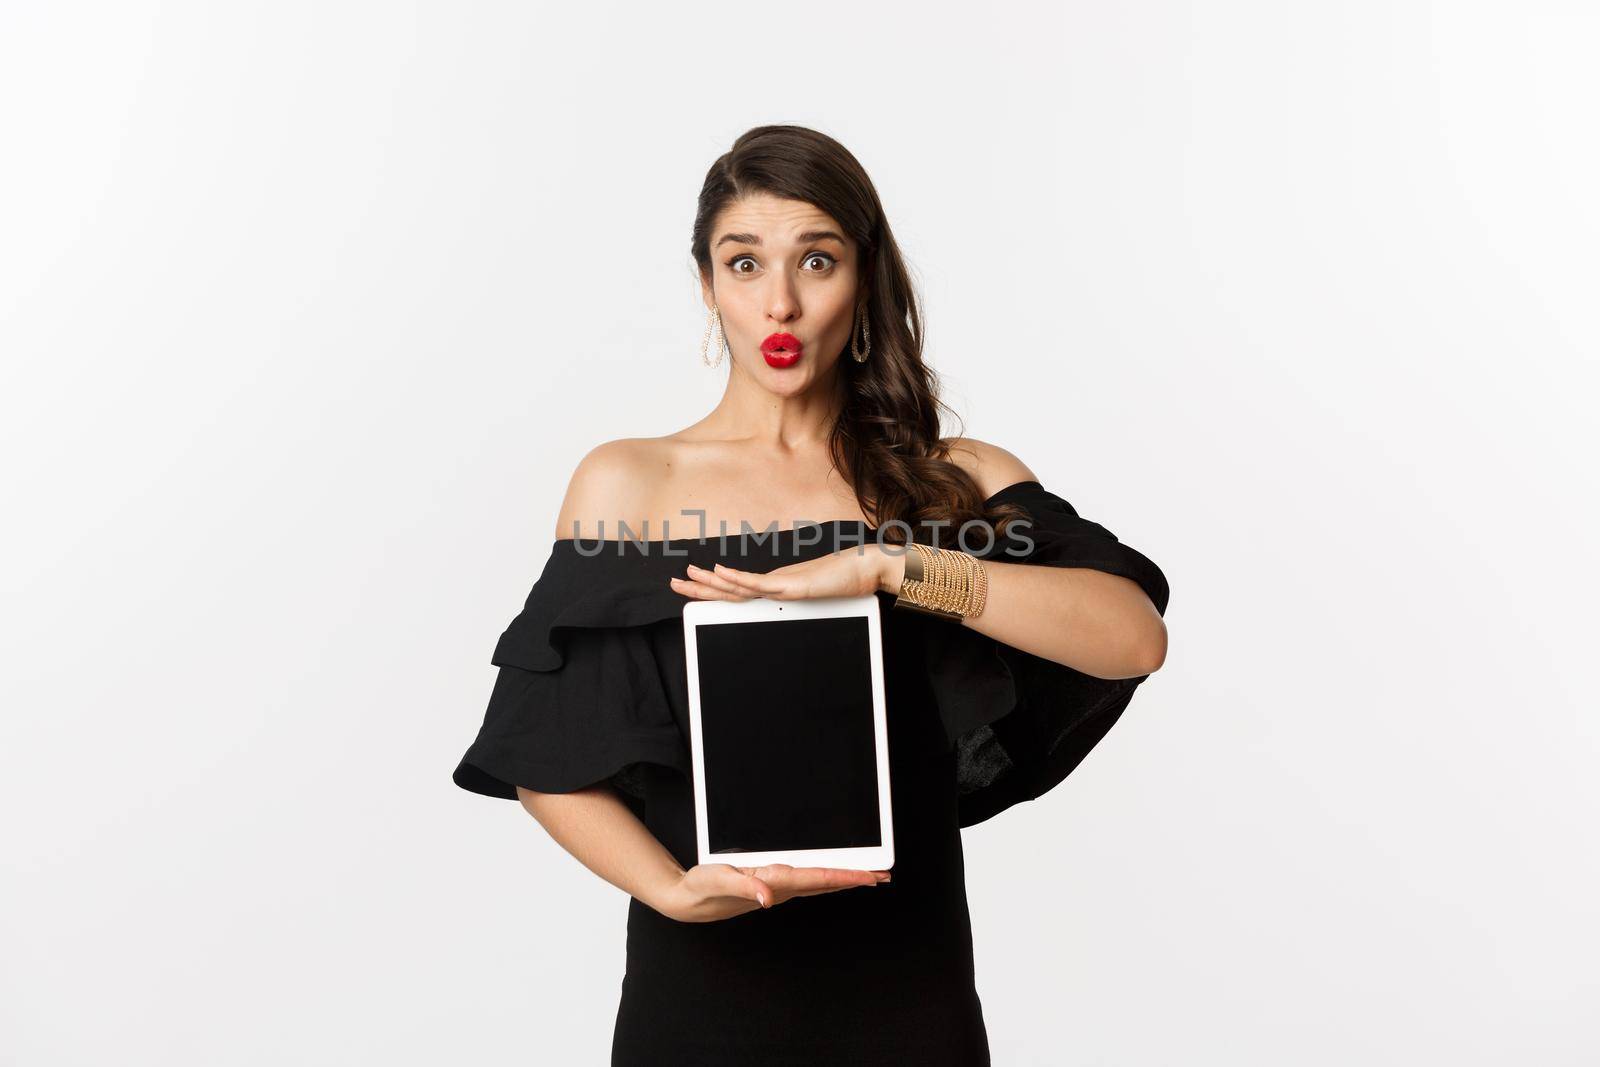 Fashion and shopping concept. Beautiful woman with red lipsticks, black dress, showing tablet screen and looking excited, standing over white background.